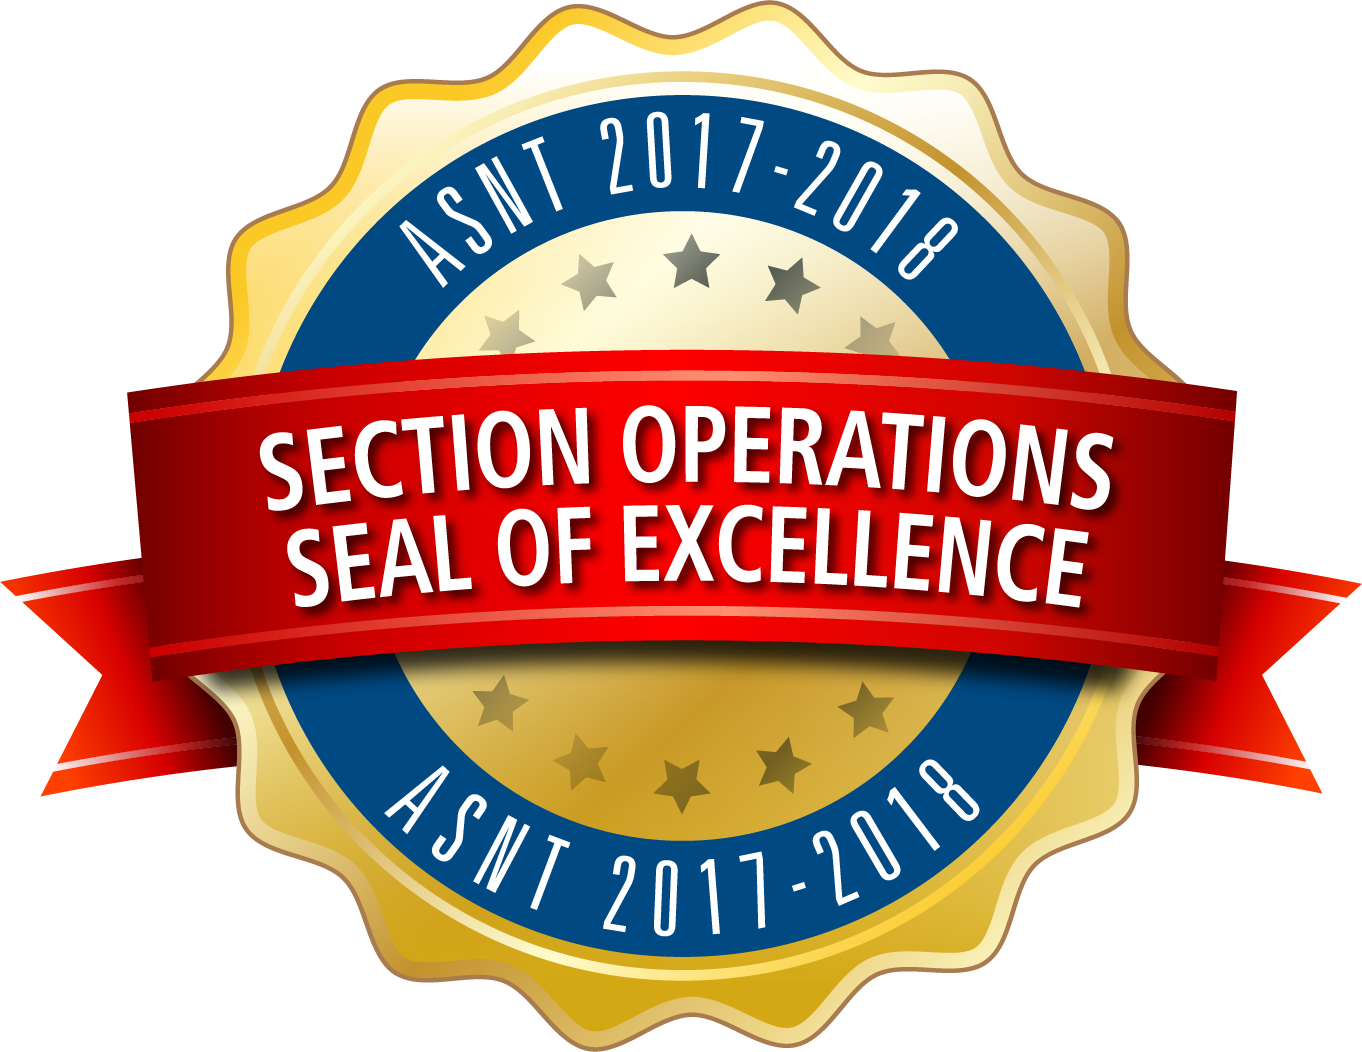 seal of excellence